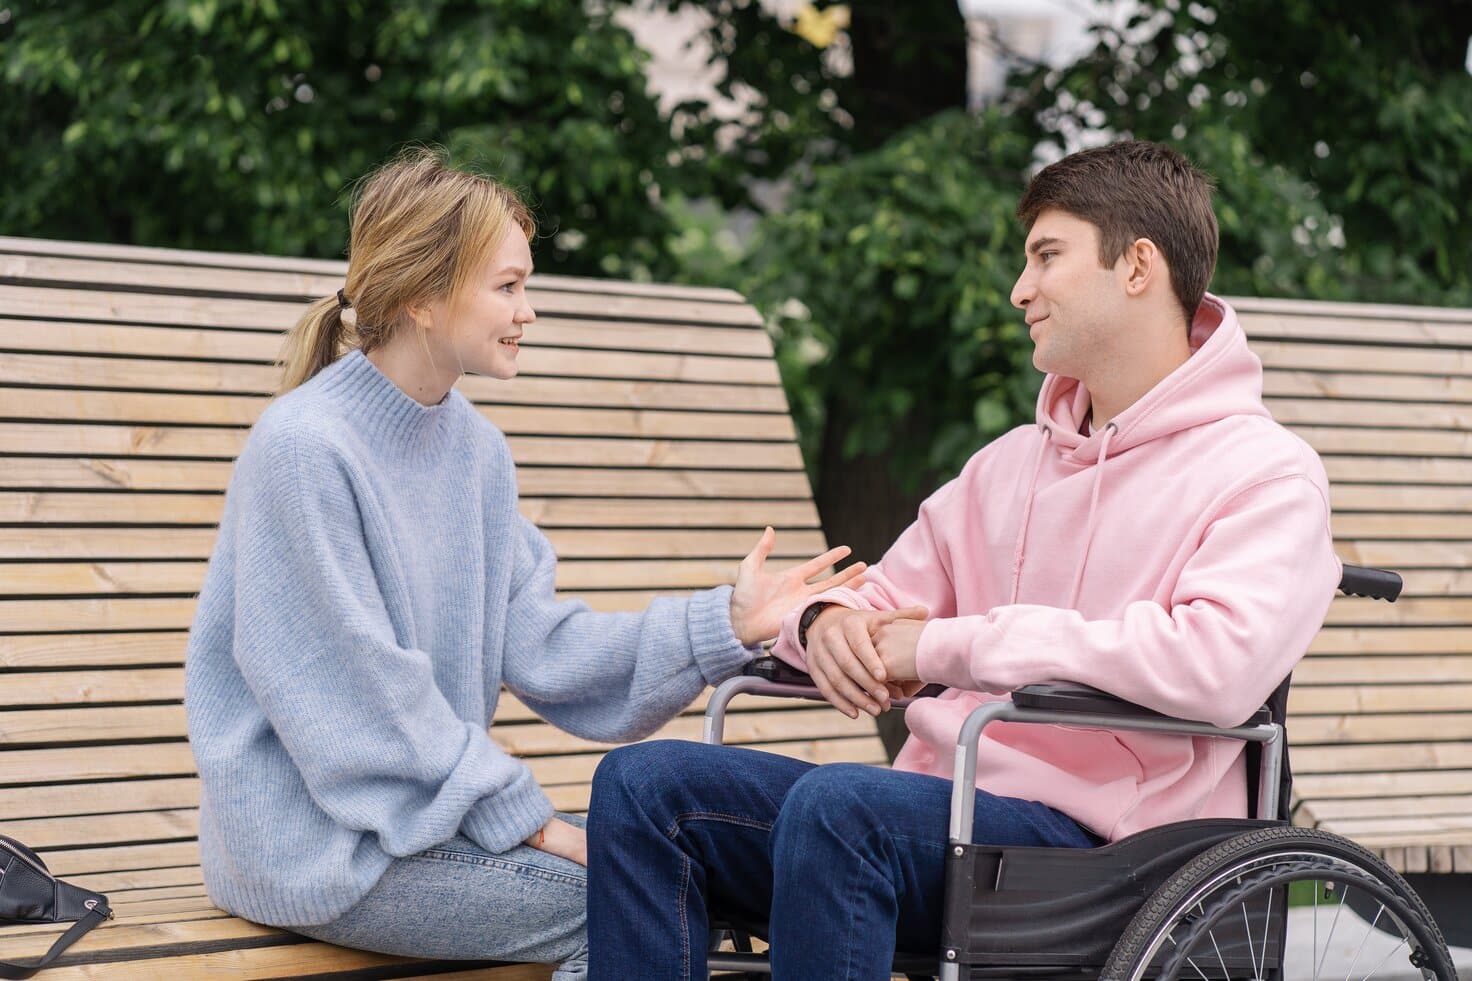 DisabilityPlus changes futures for the better with accessible psychotherapies